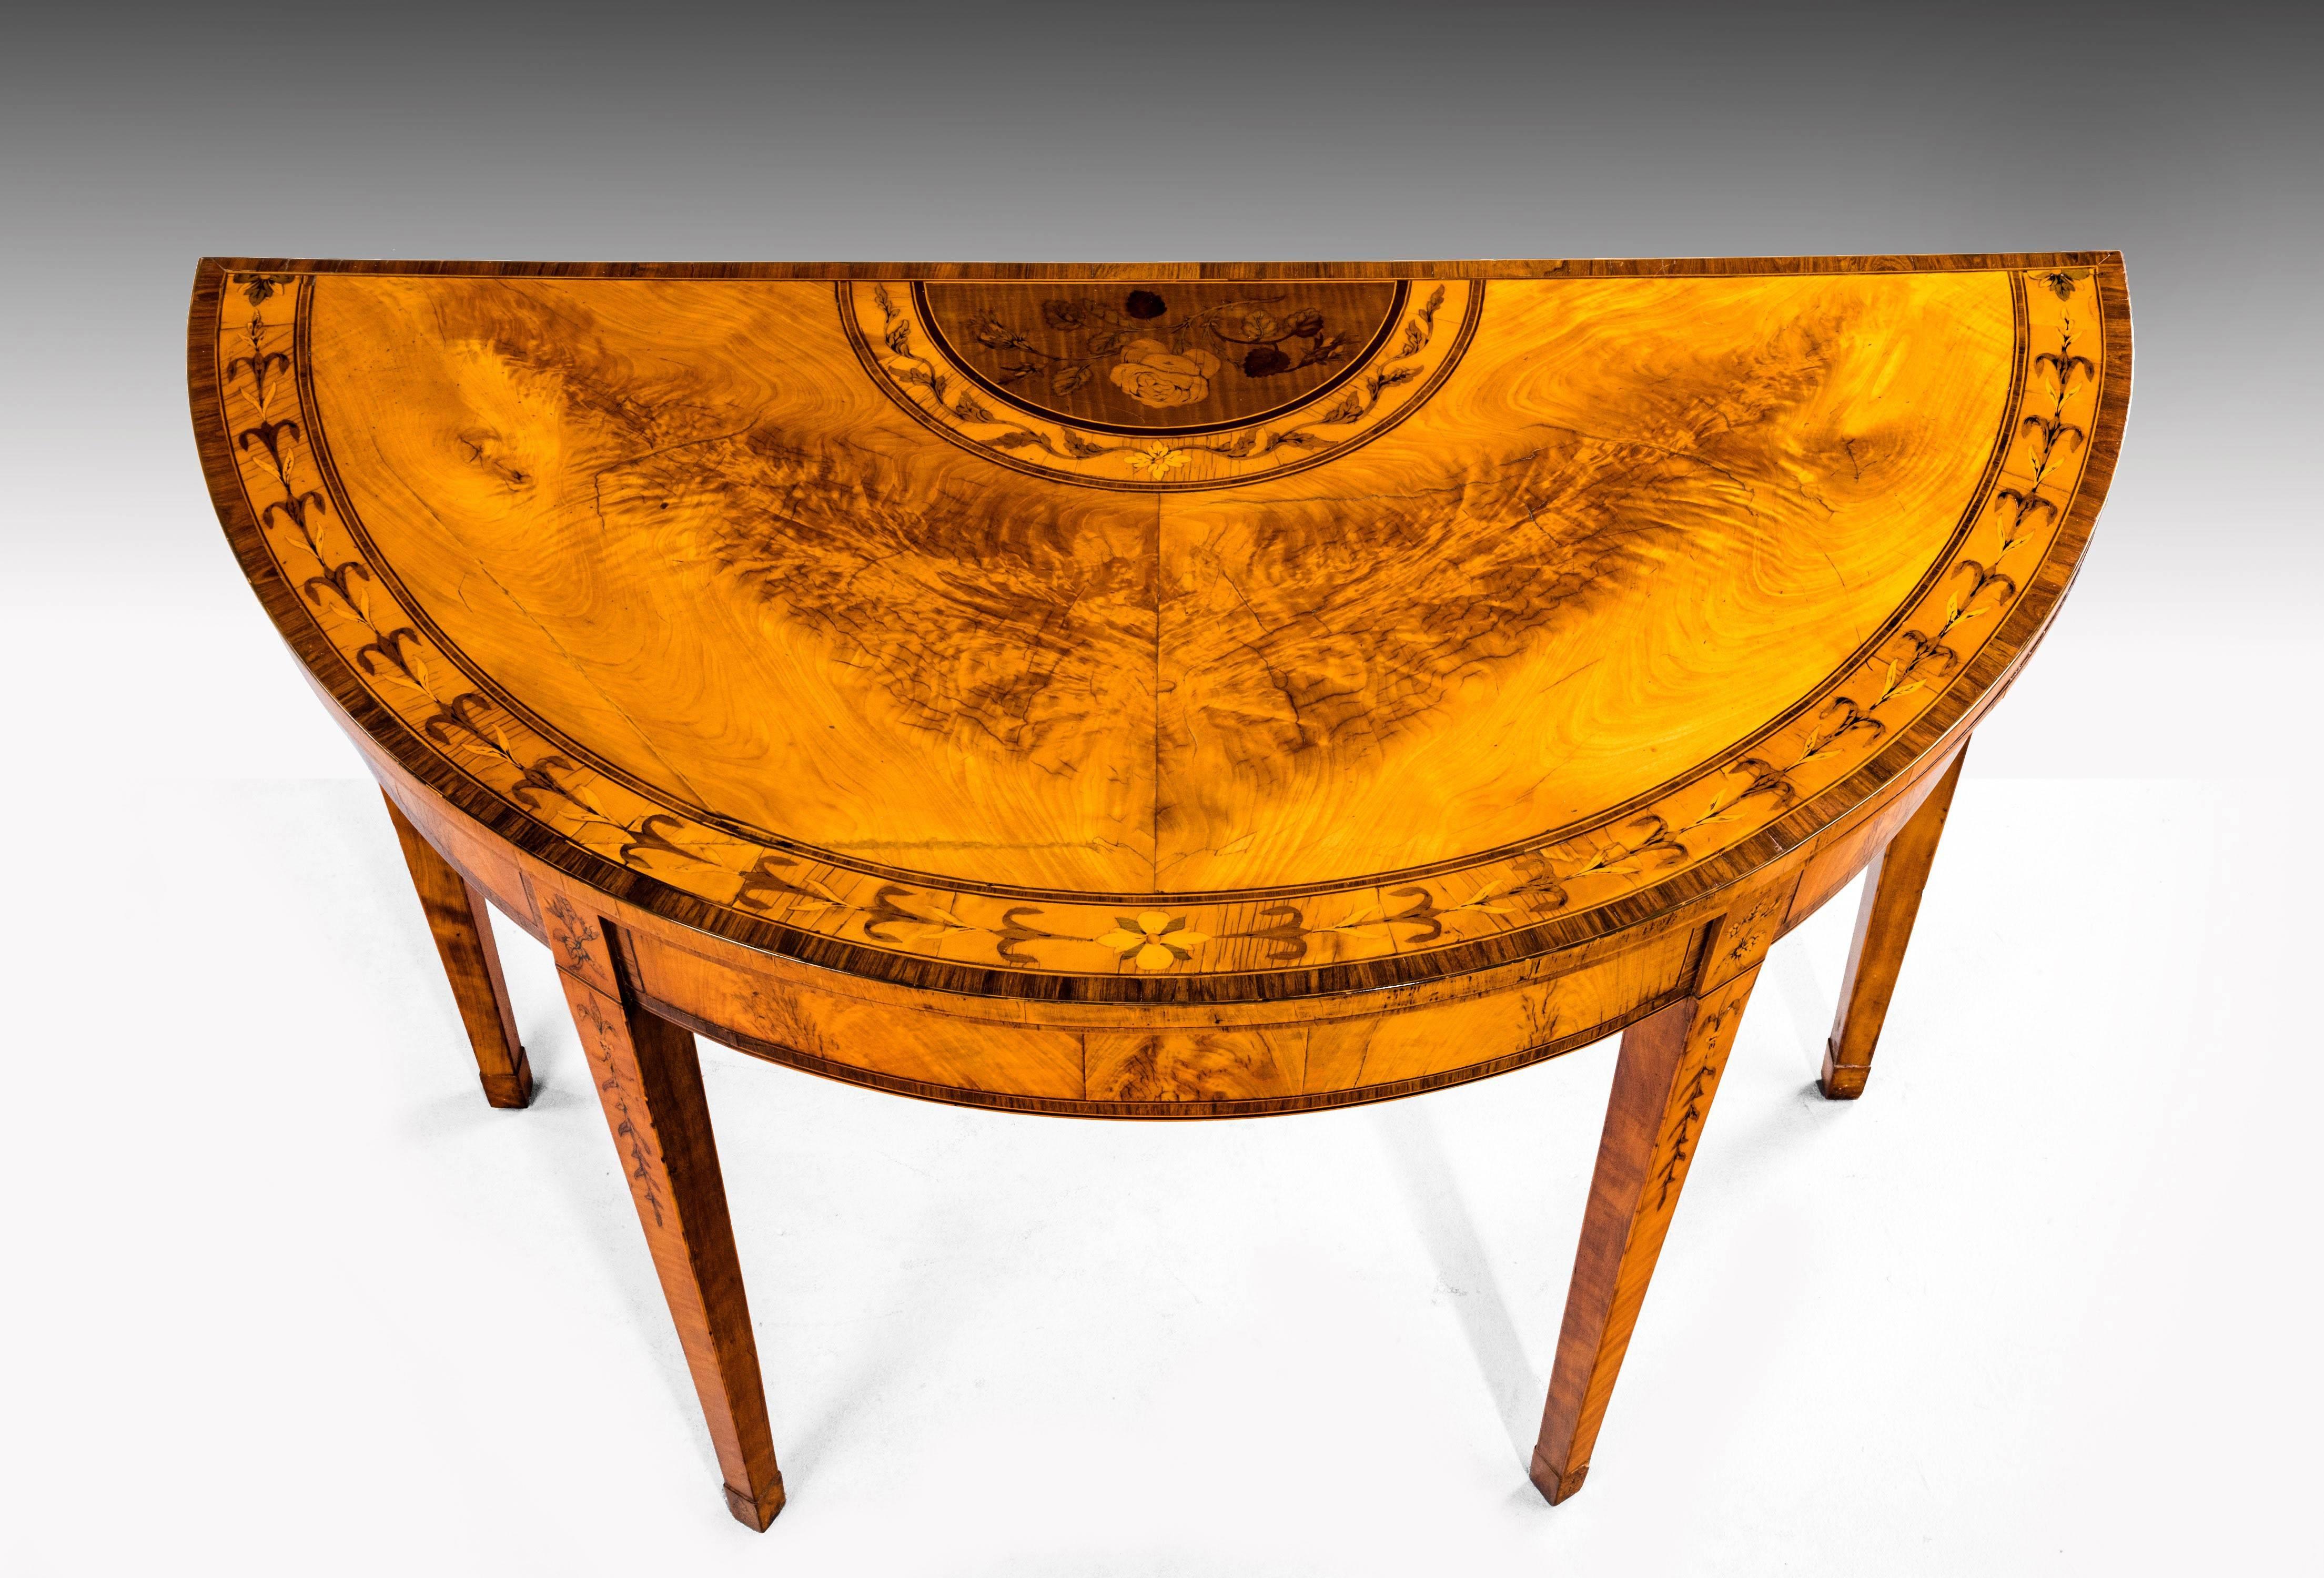 18th Century Pair of George III Period Satinwood Card Tables with Harebell and Leaf Decoratio